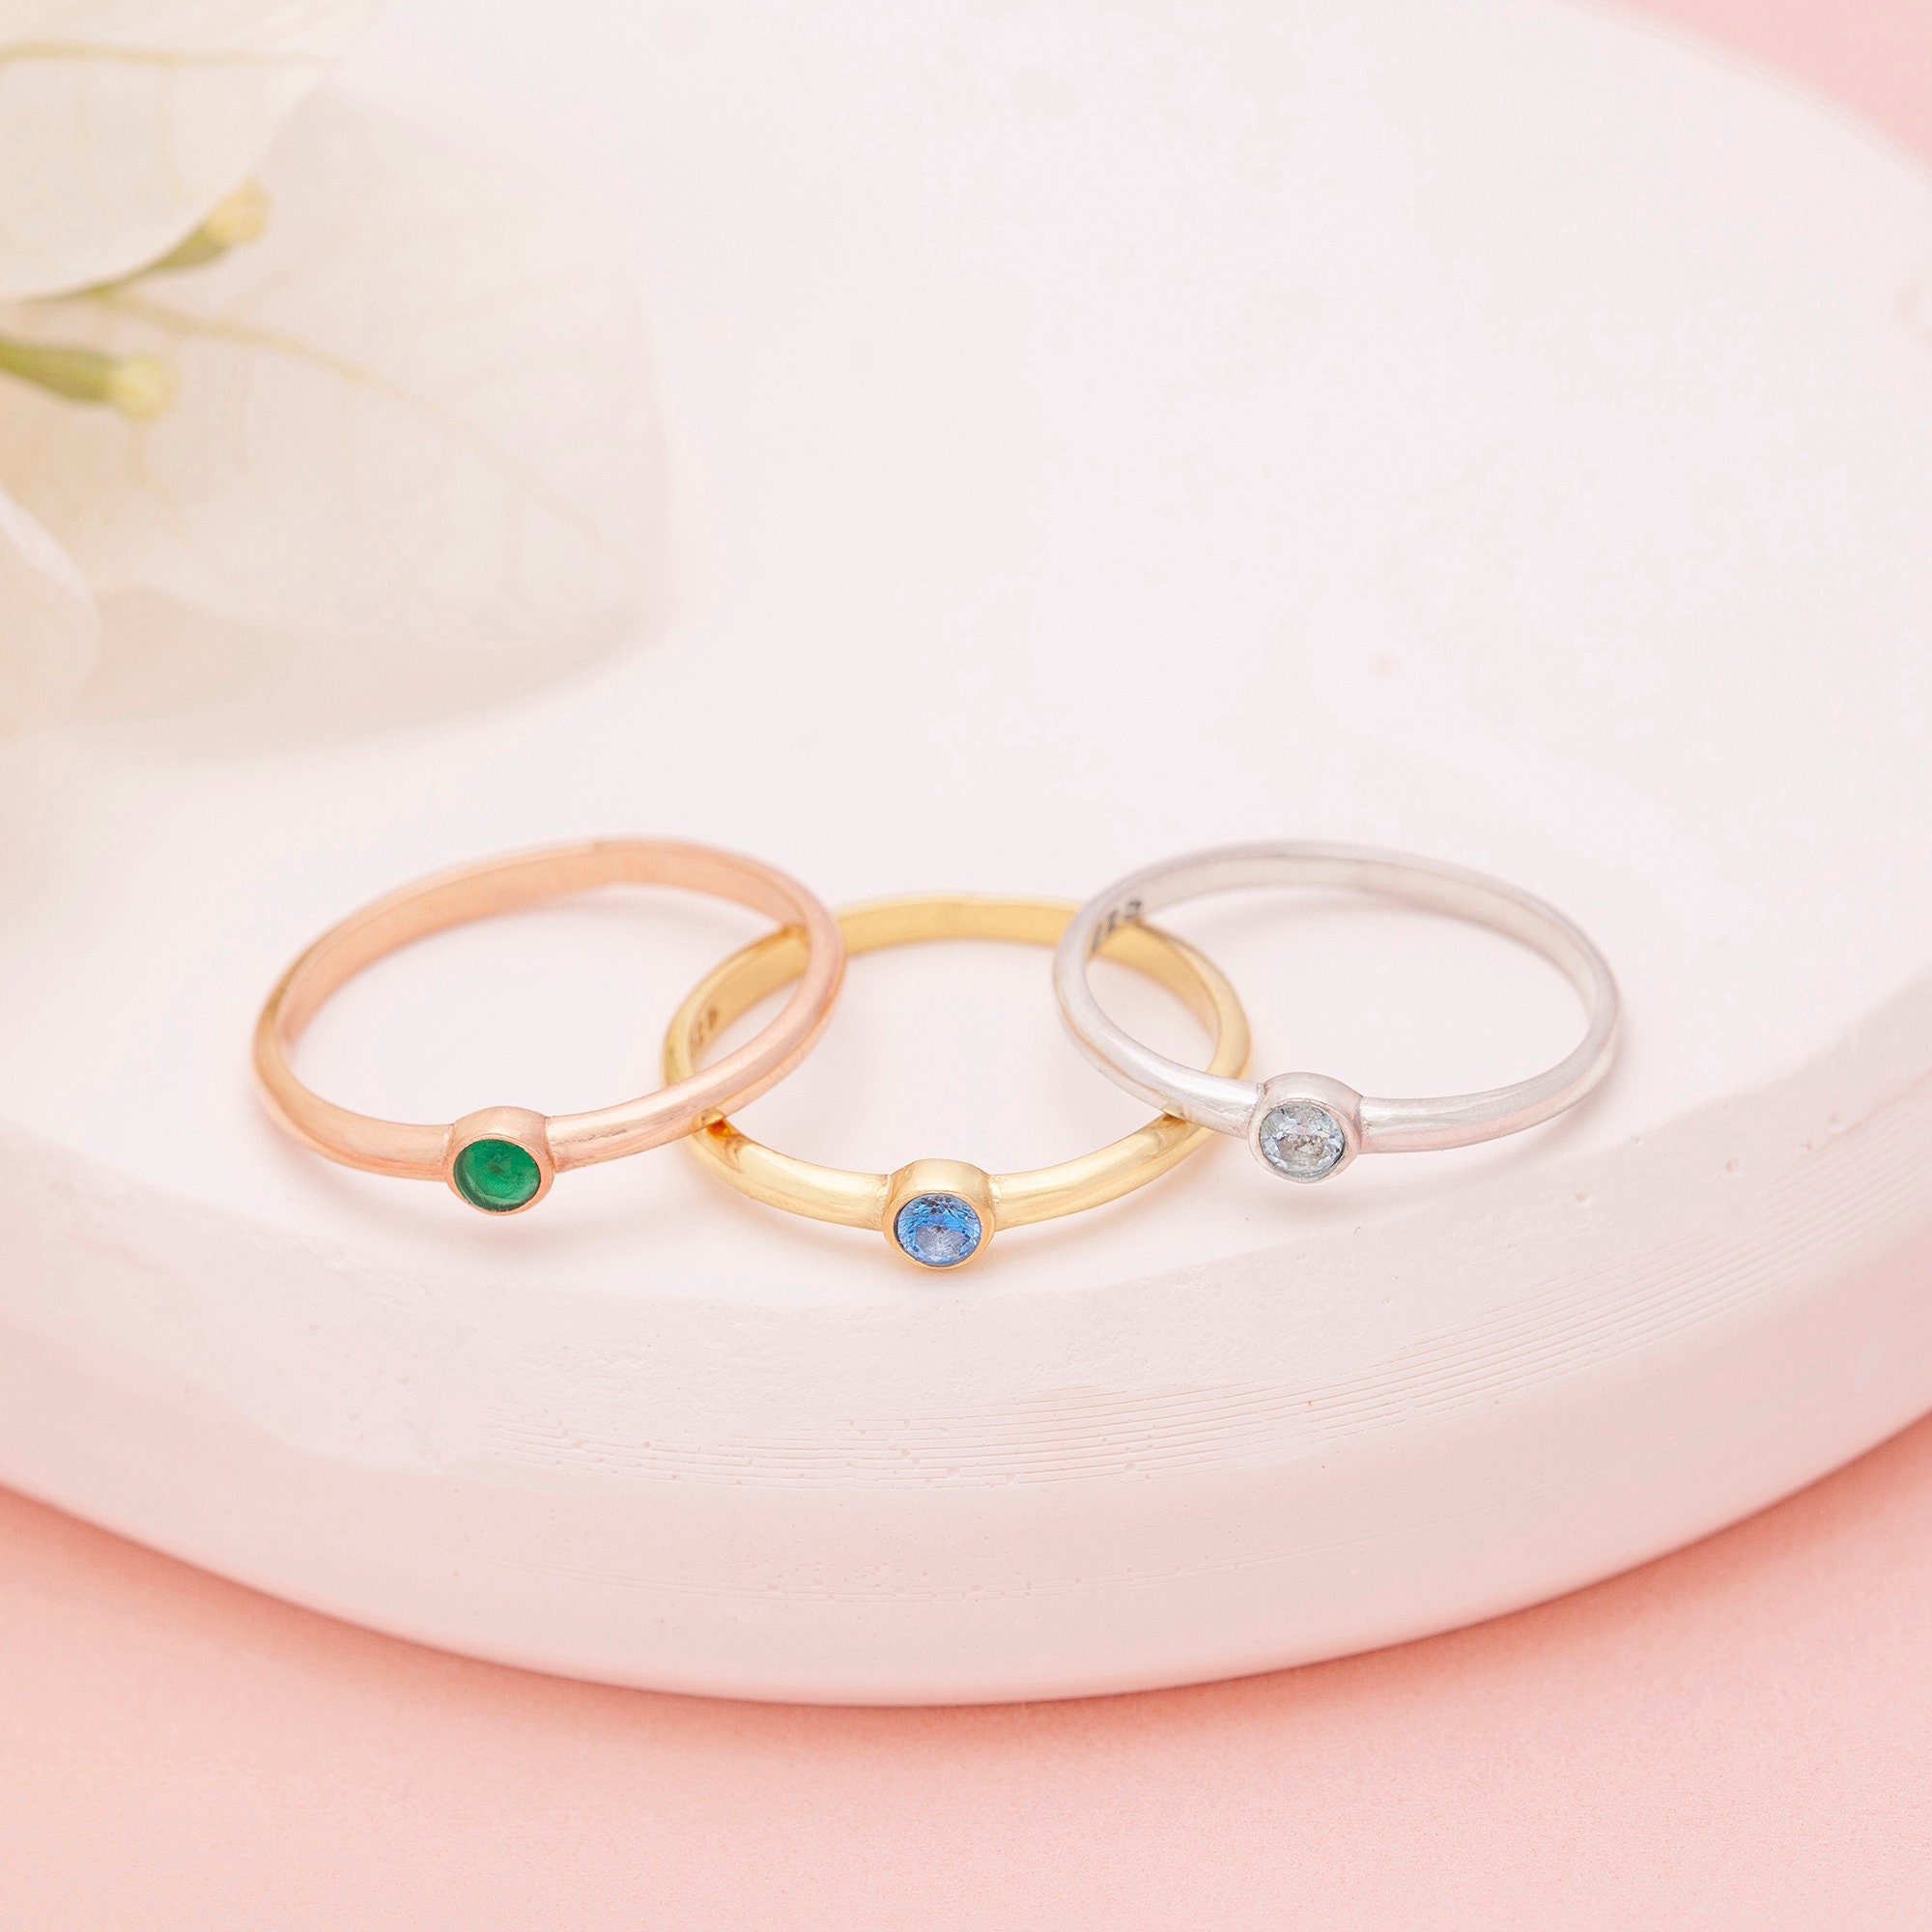 Shop kids rings, girl's friendship rings and jewellery online | Milimilu.com